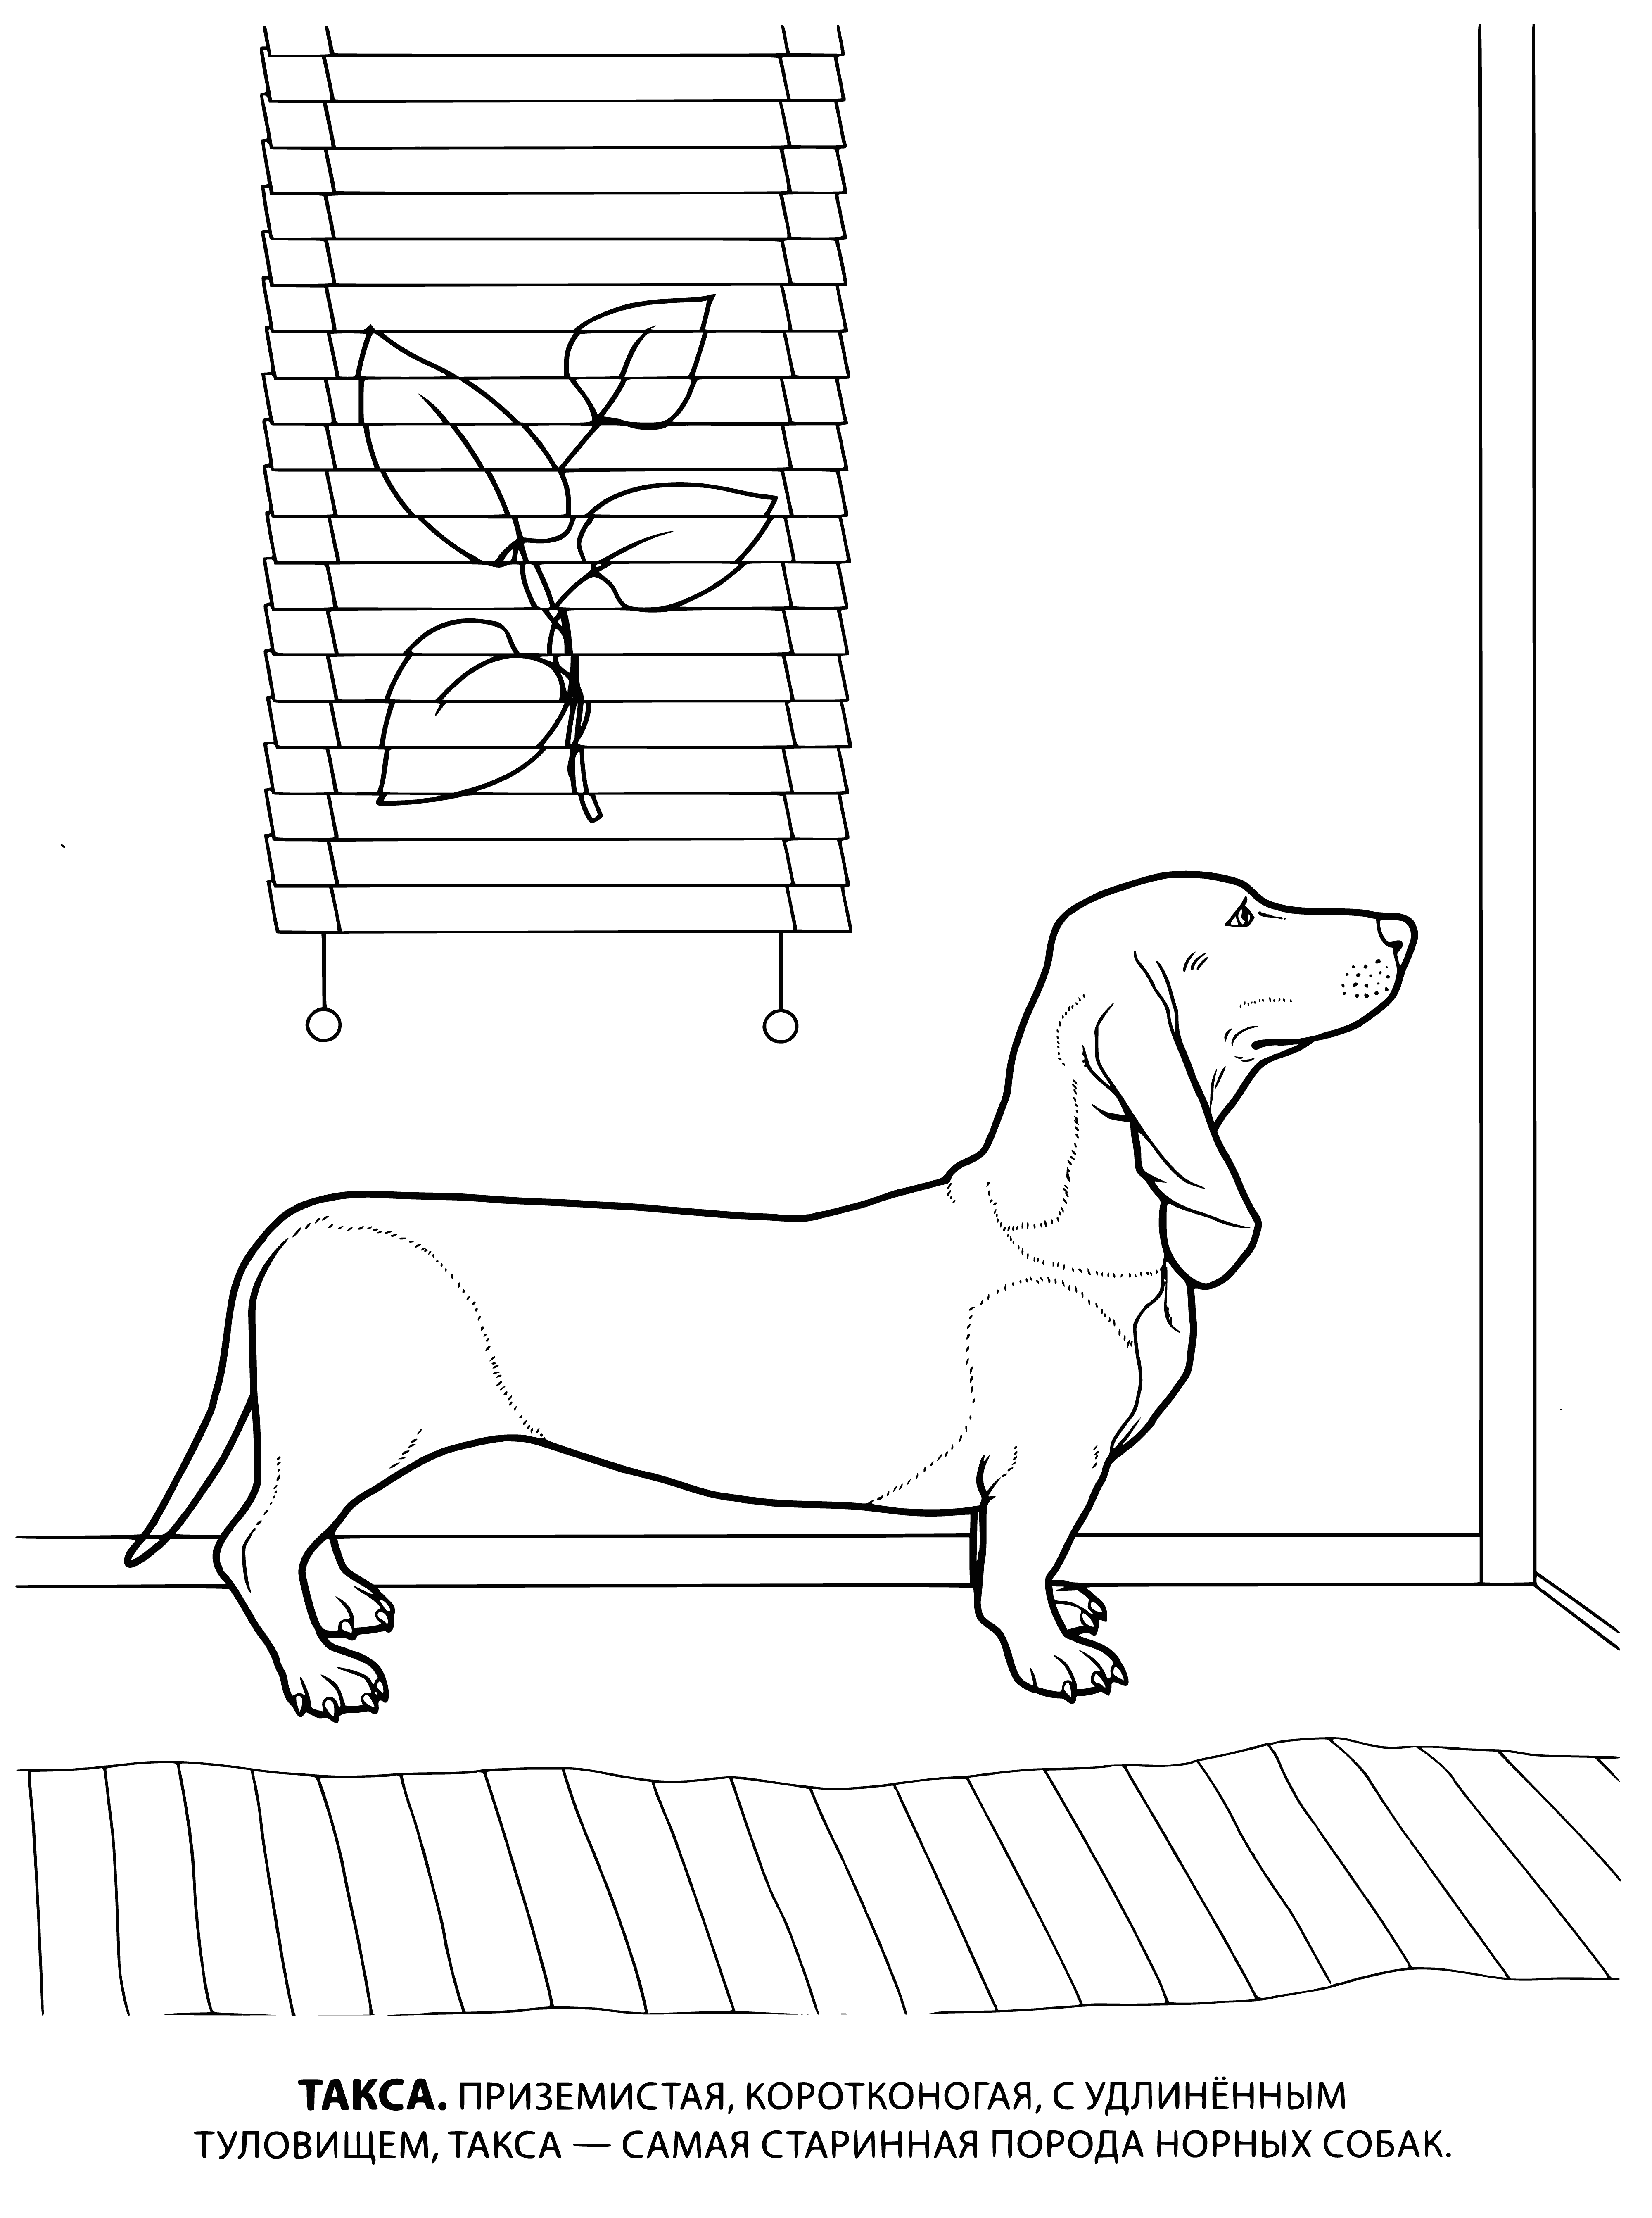 coloring page: A small brown and white dog with a purple leash sticks its tongue out in a grassy field. #cutedogs